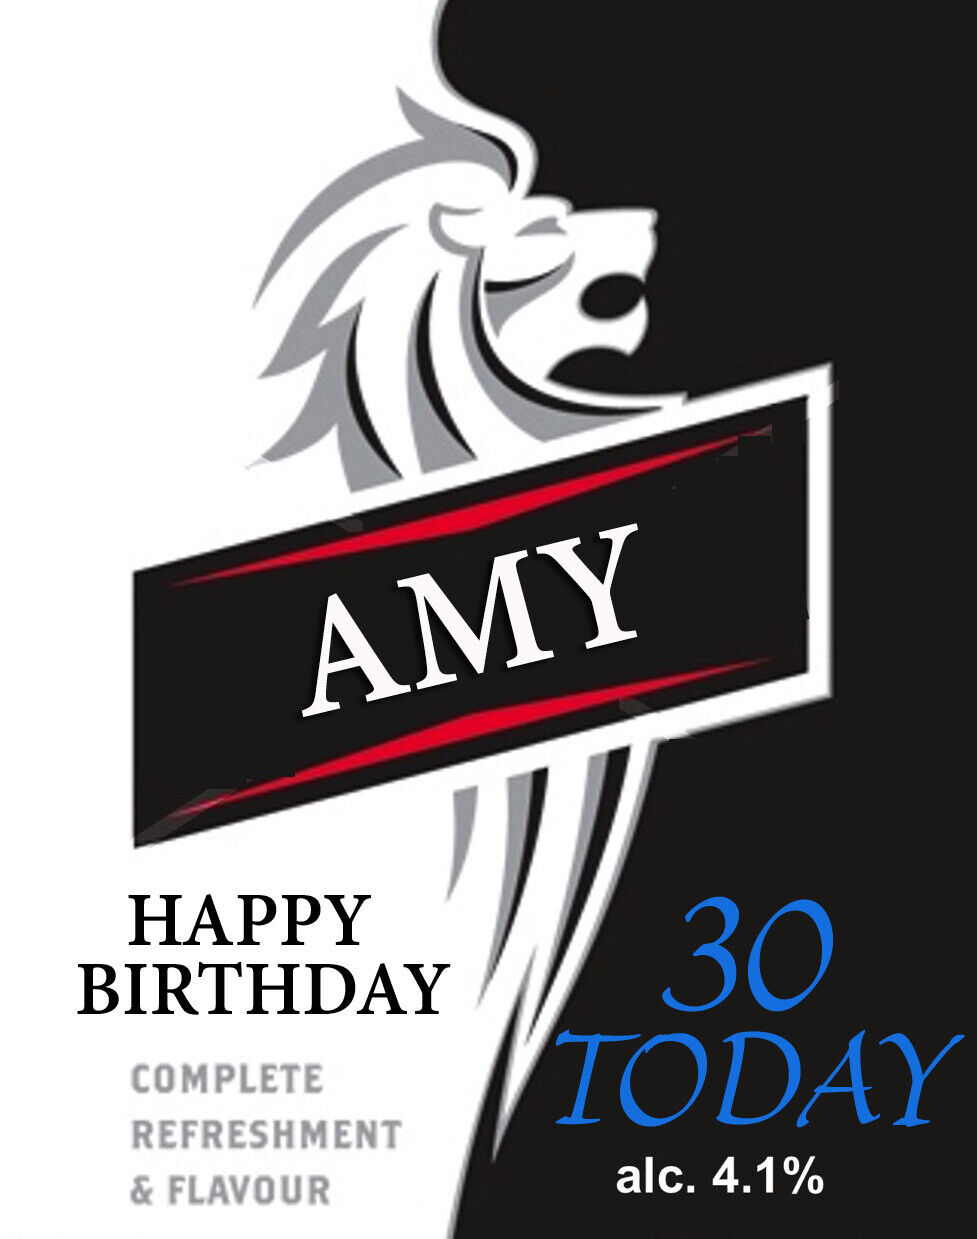 4 X PERSONALISED CARLING BEER BOTTLE LABELS - PARTY / BIRTHDAY /